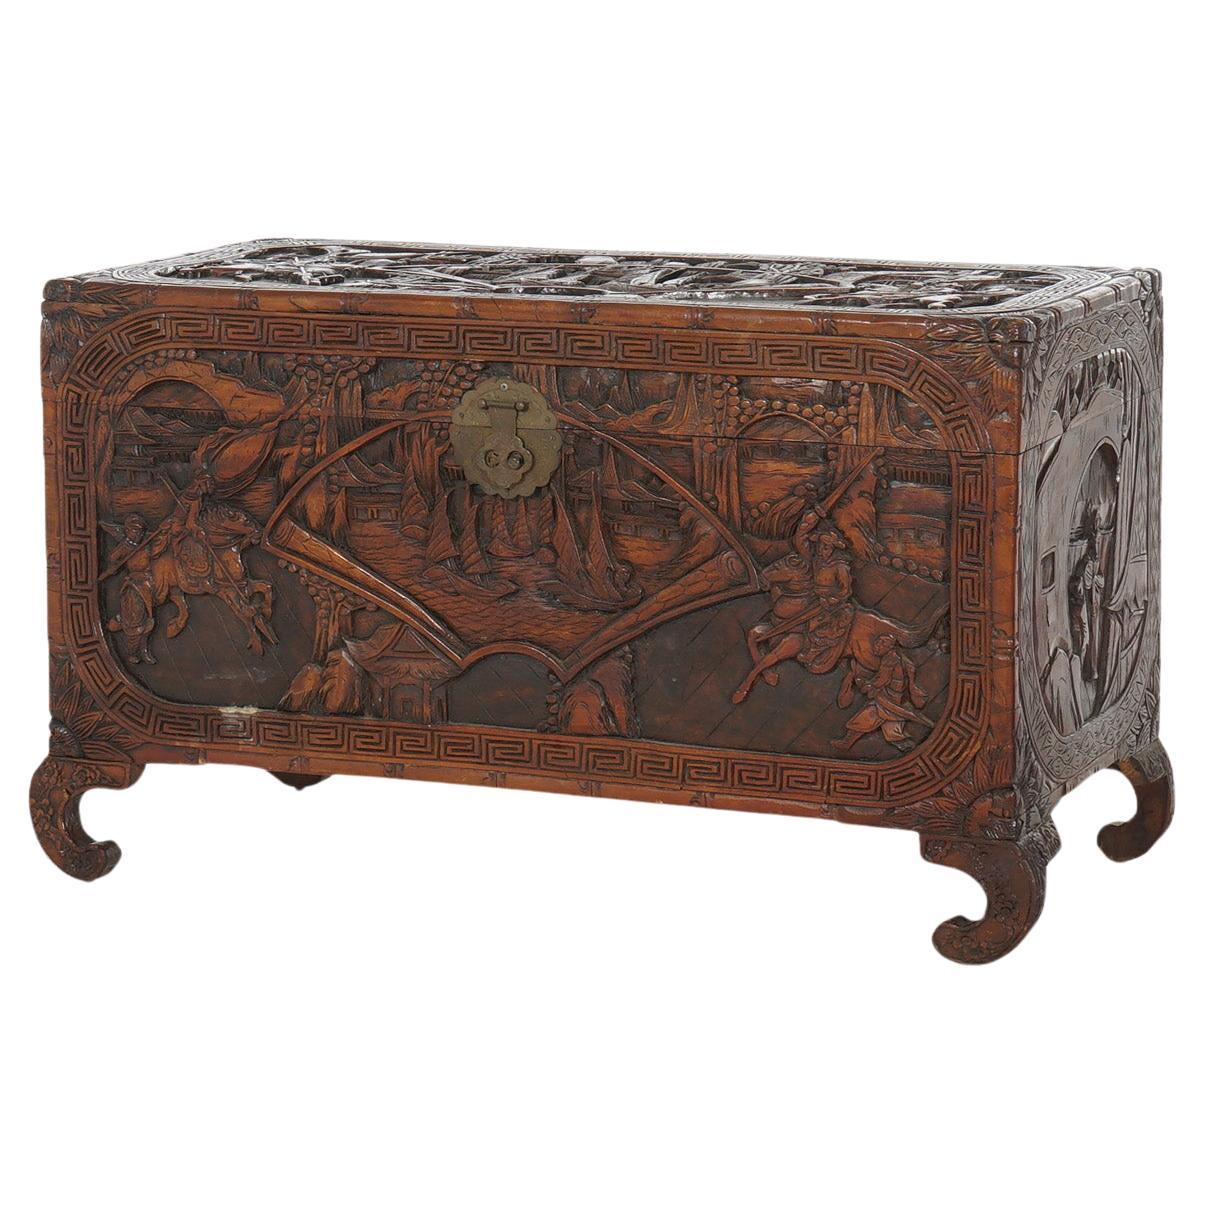 Antique Chinese Carved Hardwood Chest with Figures & Scenes in Relief C1920 For Sale